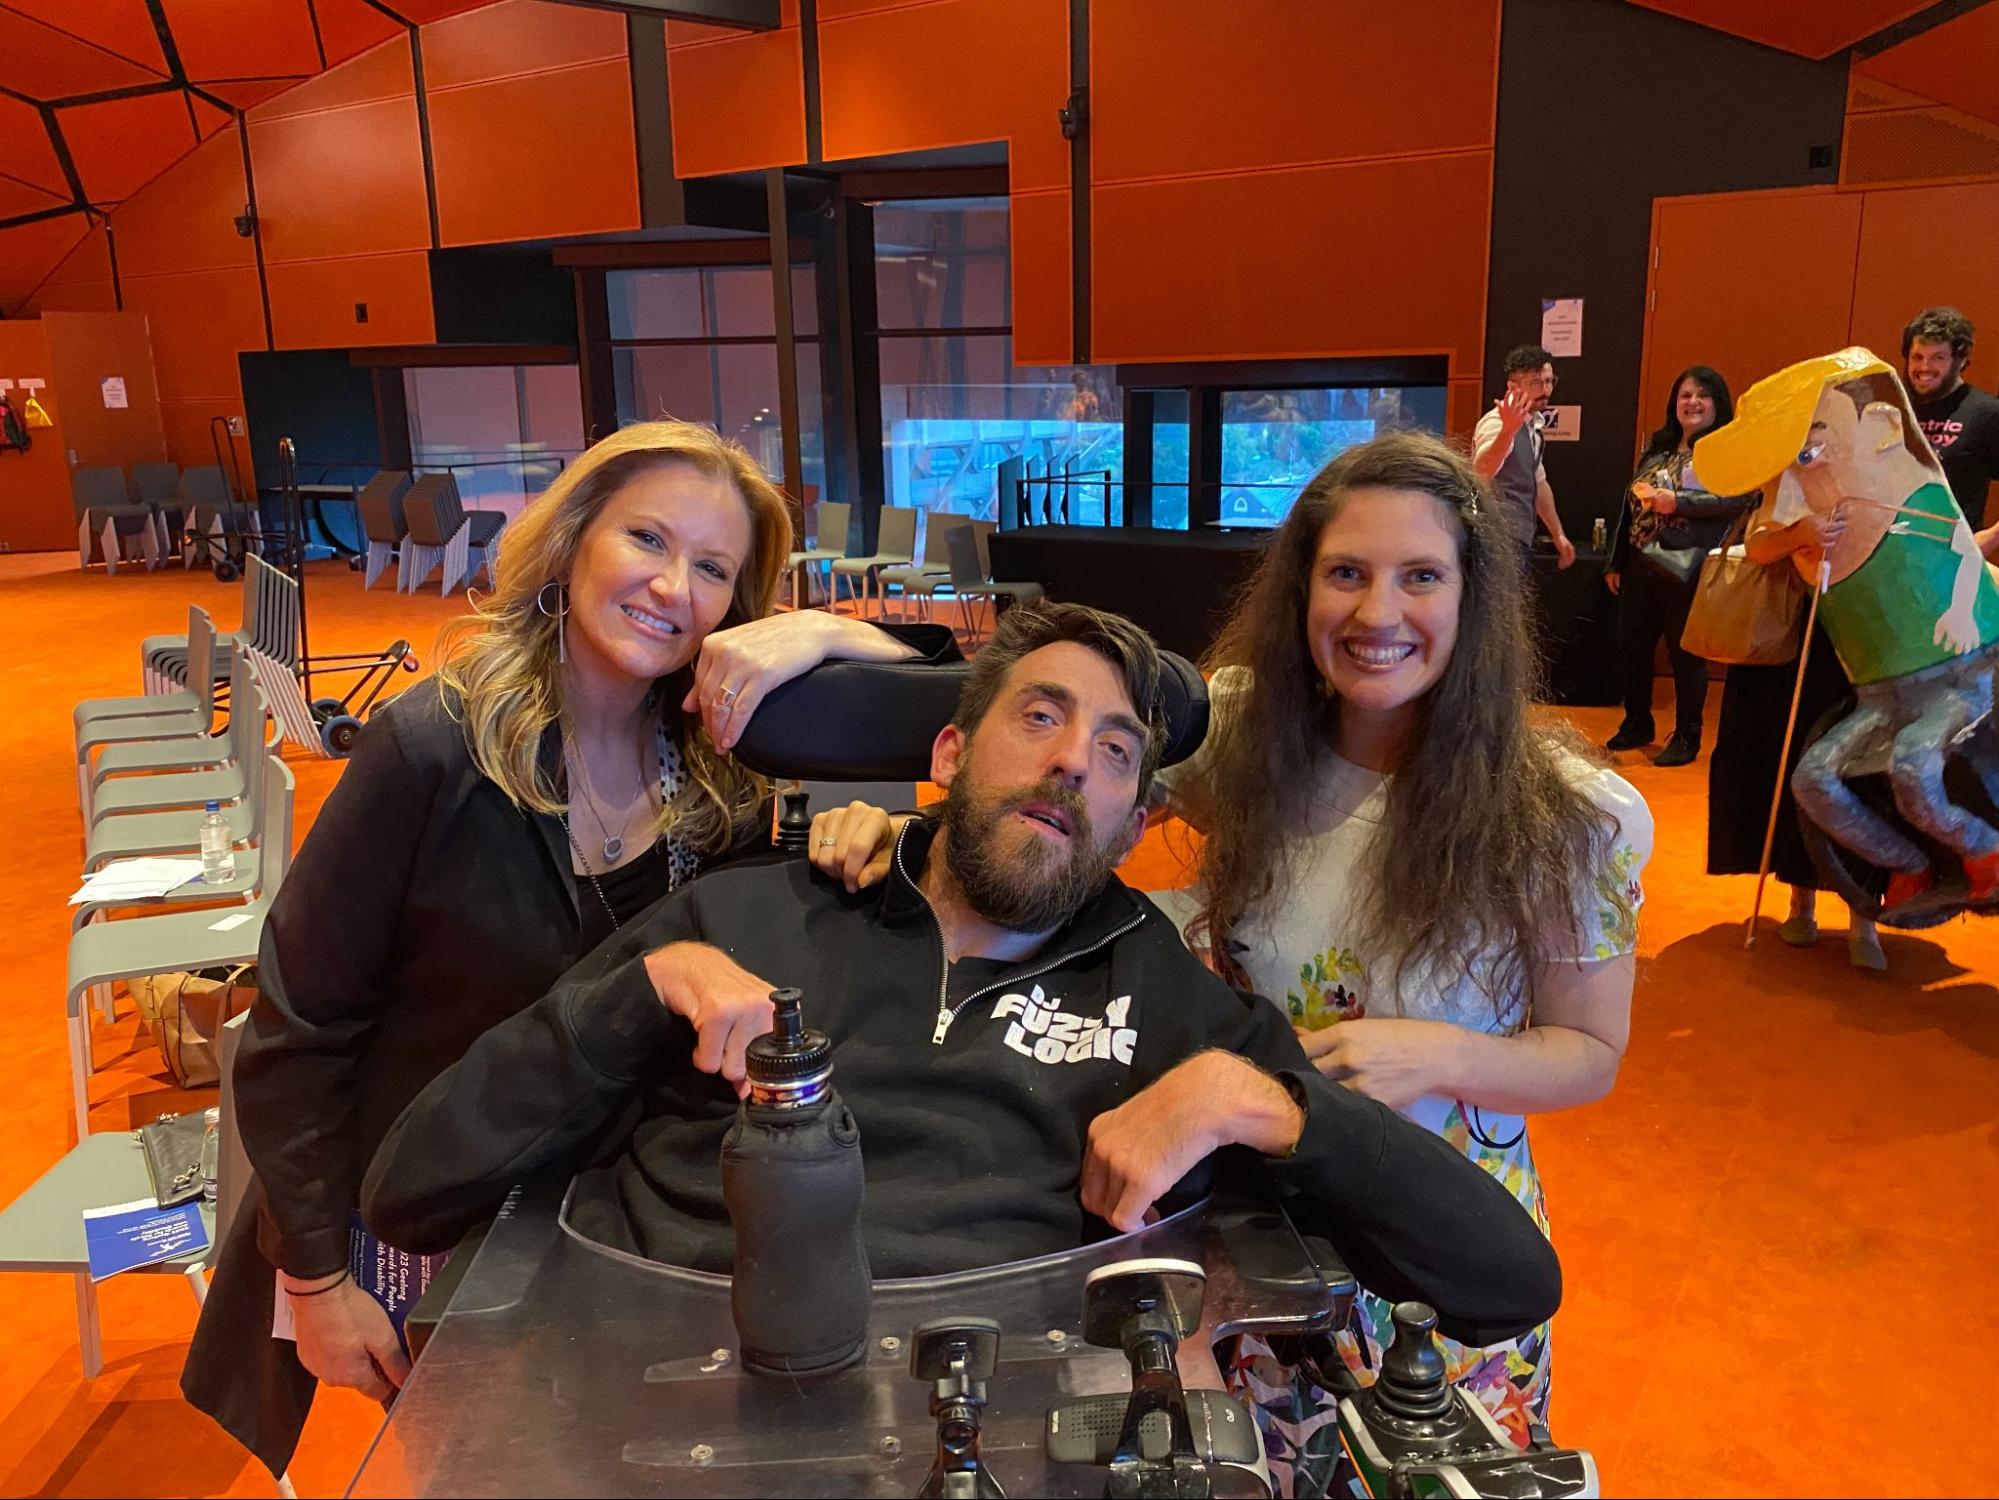 Pictured: Anna and Rachael from RIAC striking a pose with DJ Fuzzy Logic (Ryan Schmidtke).